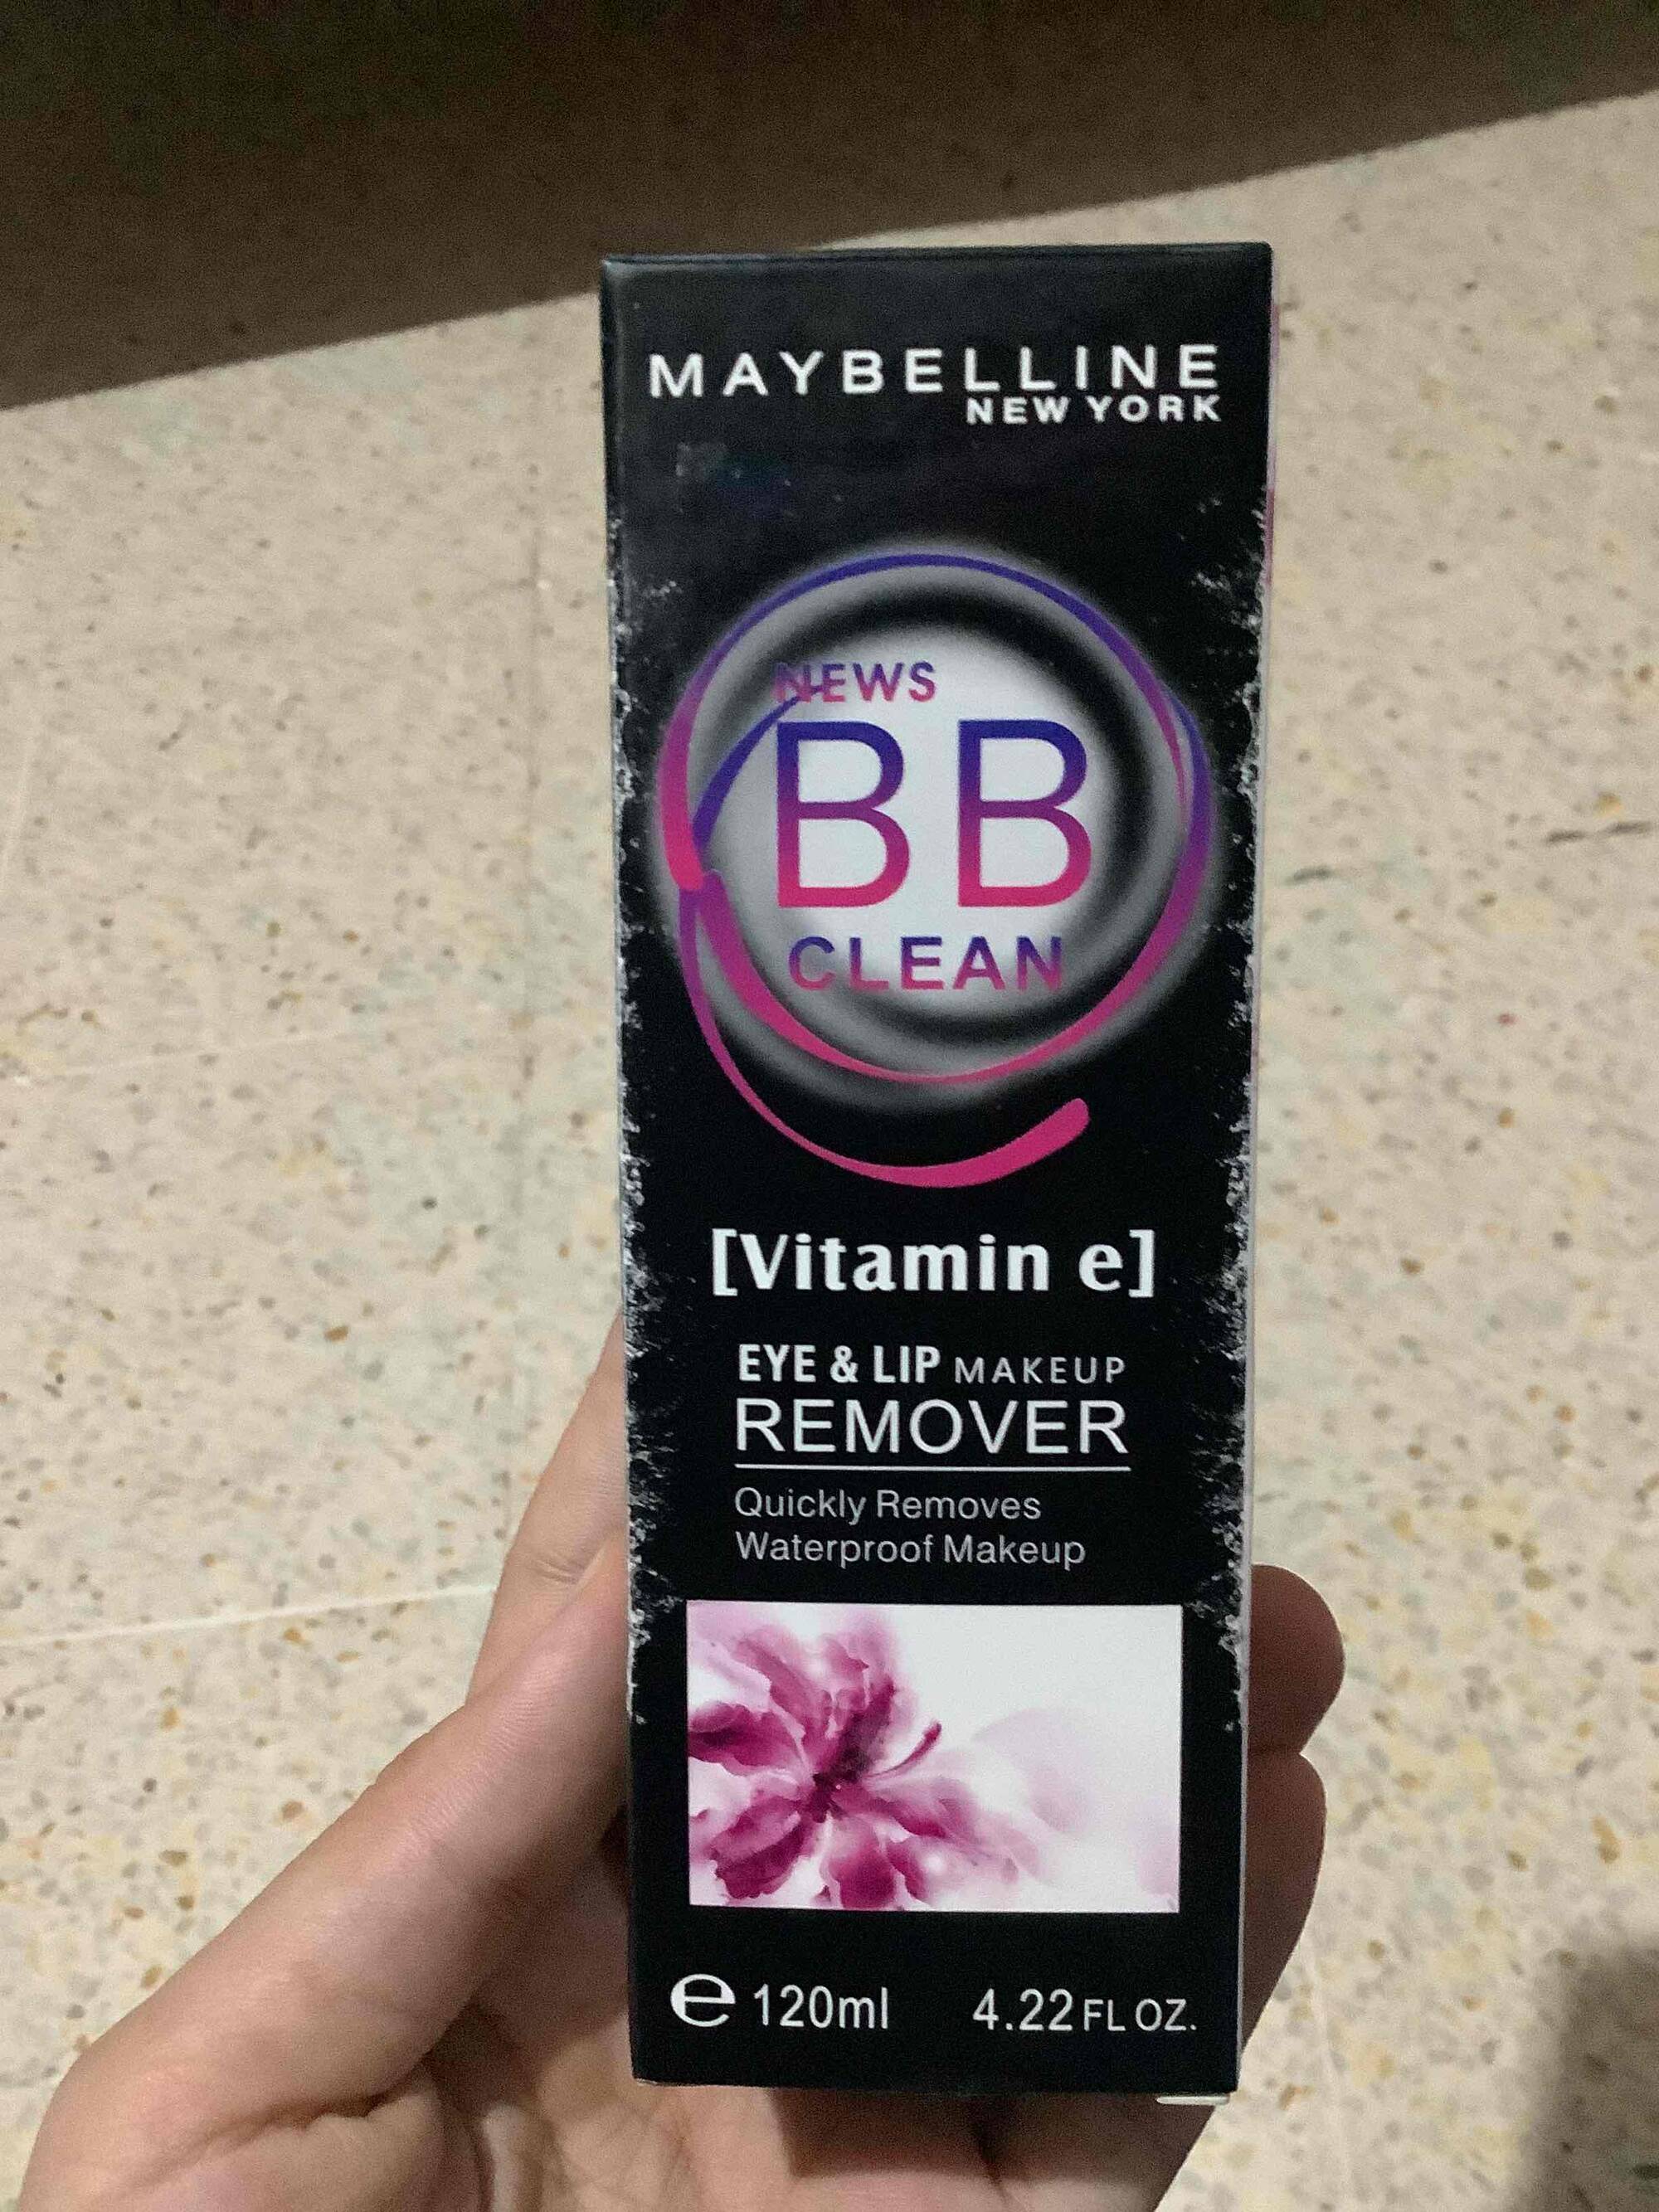 MAYBELLINE - BB clean - Eye & lip makeup remover